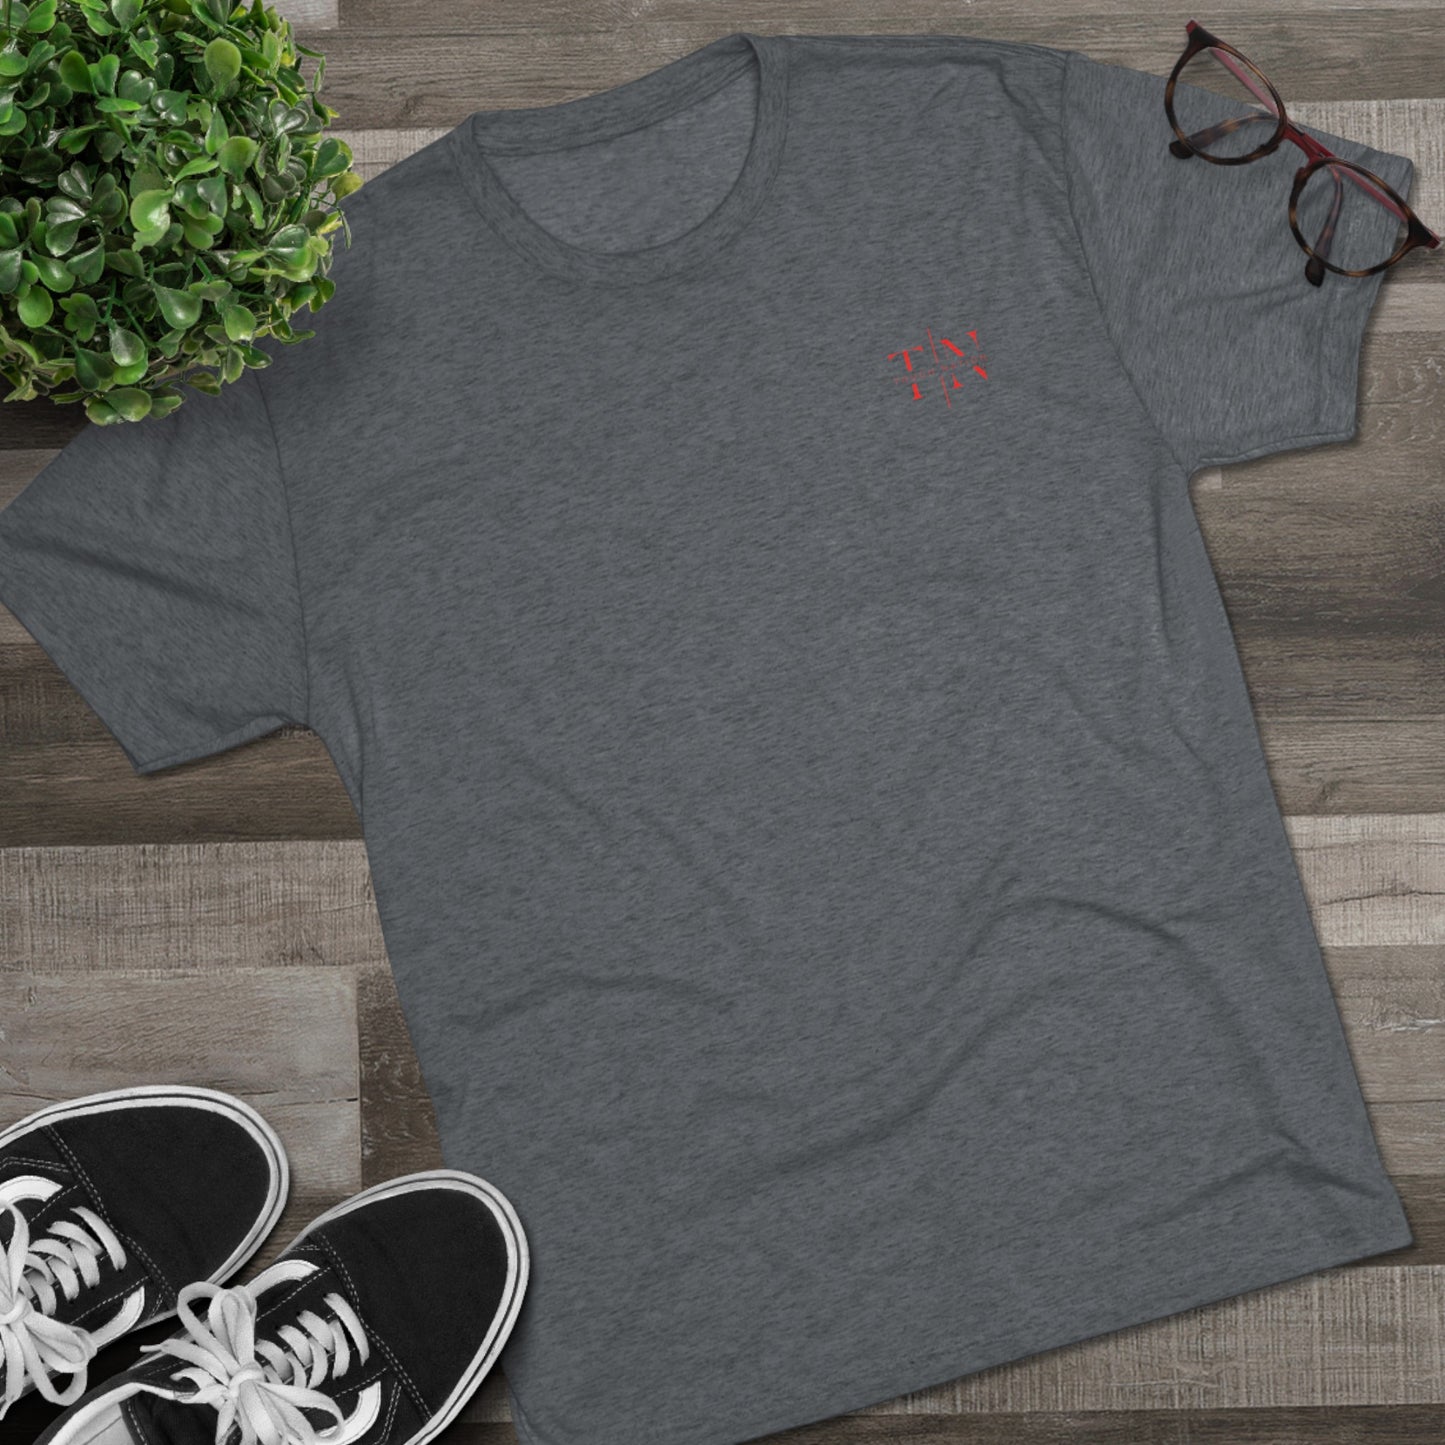 Full Fit Faith Tee: Fuel Your Workouts with Faith-Based Inspiration